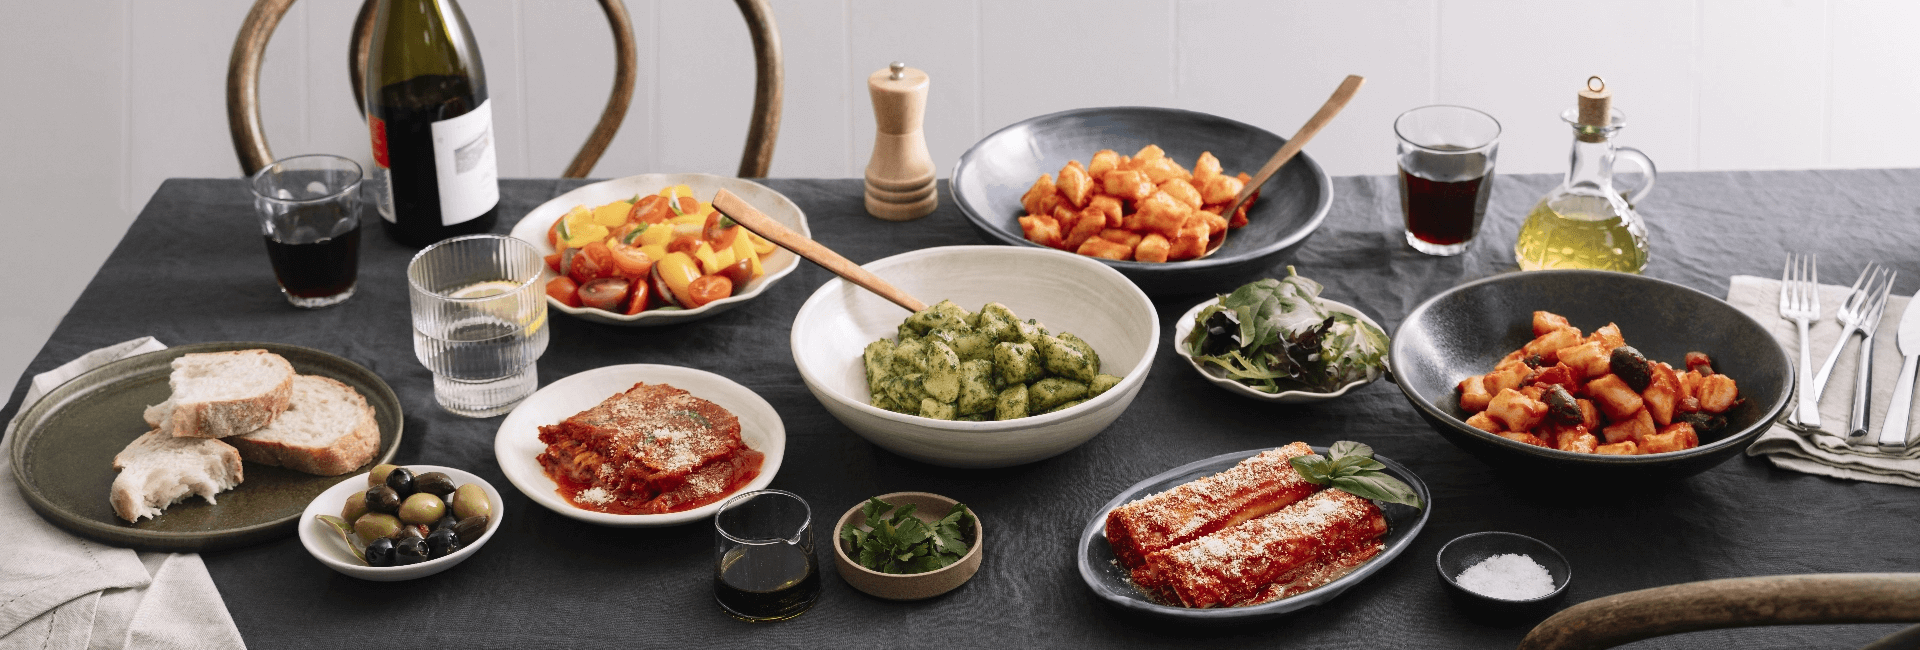 ready made meals available across Melbourne